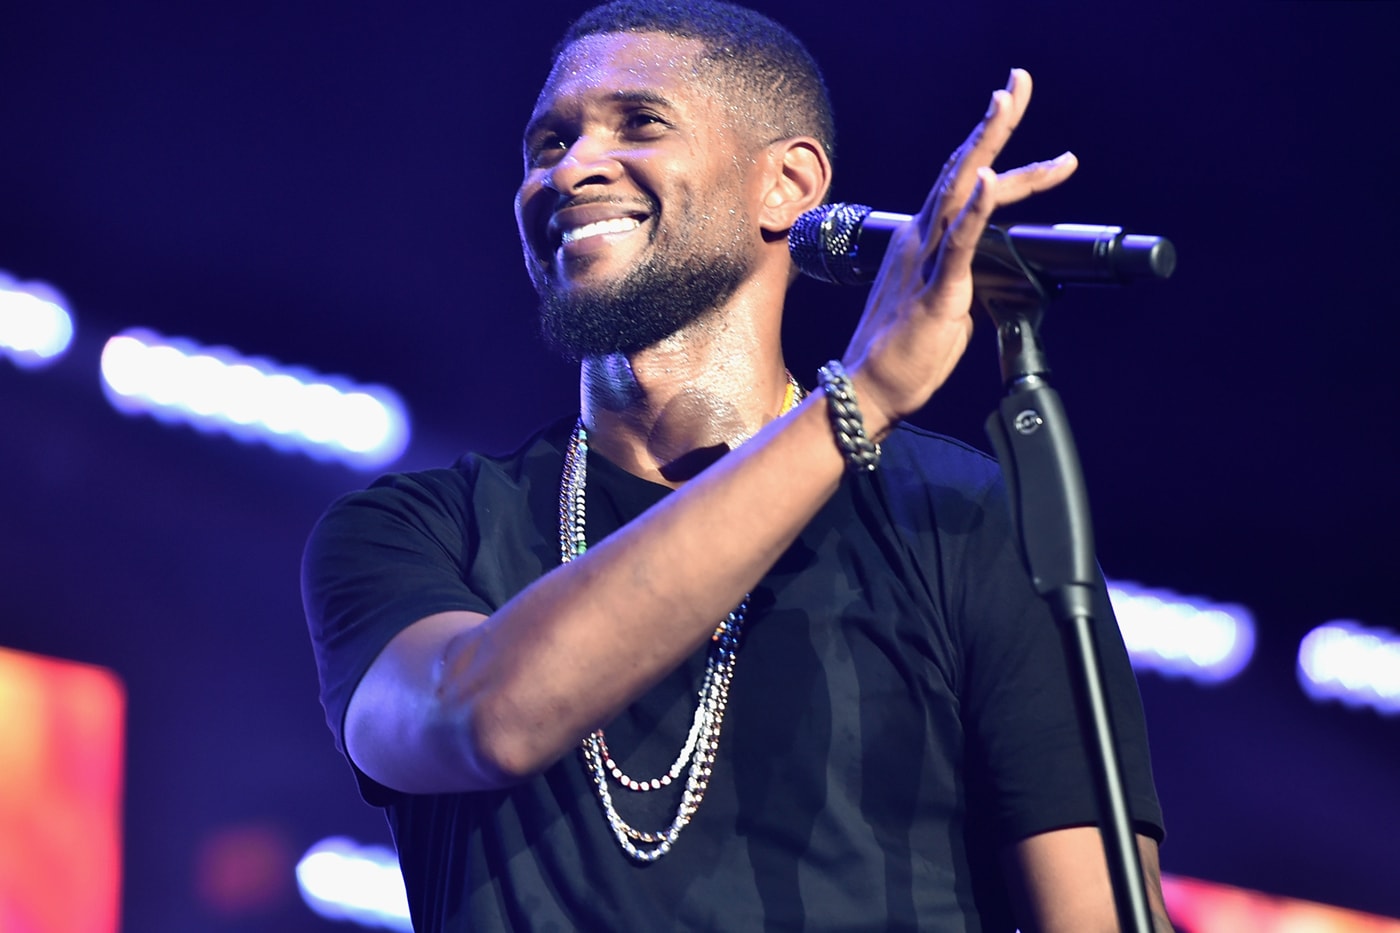 usher-musicians-team-up-john-oliver-to-tell-politicians-stop-using-our